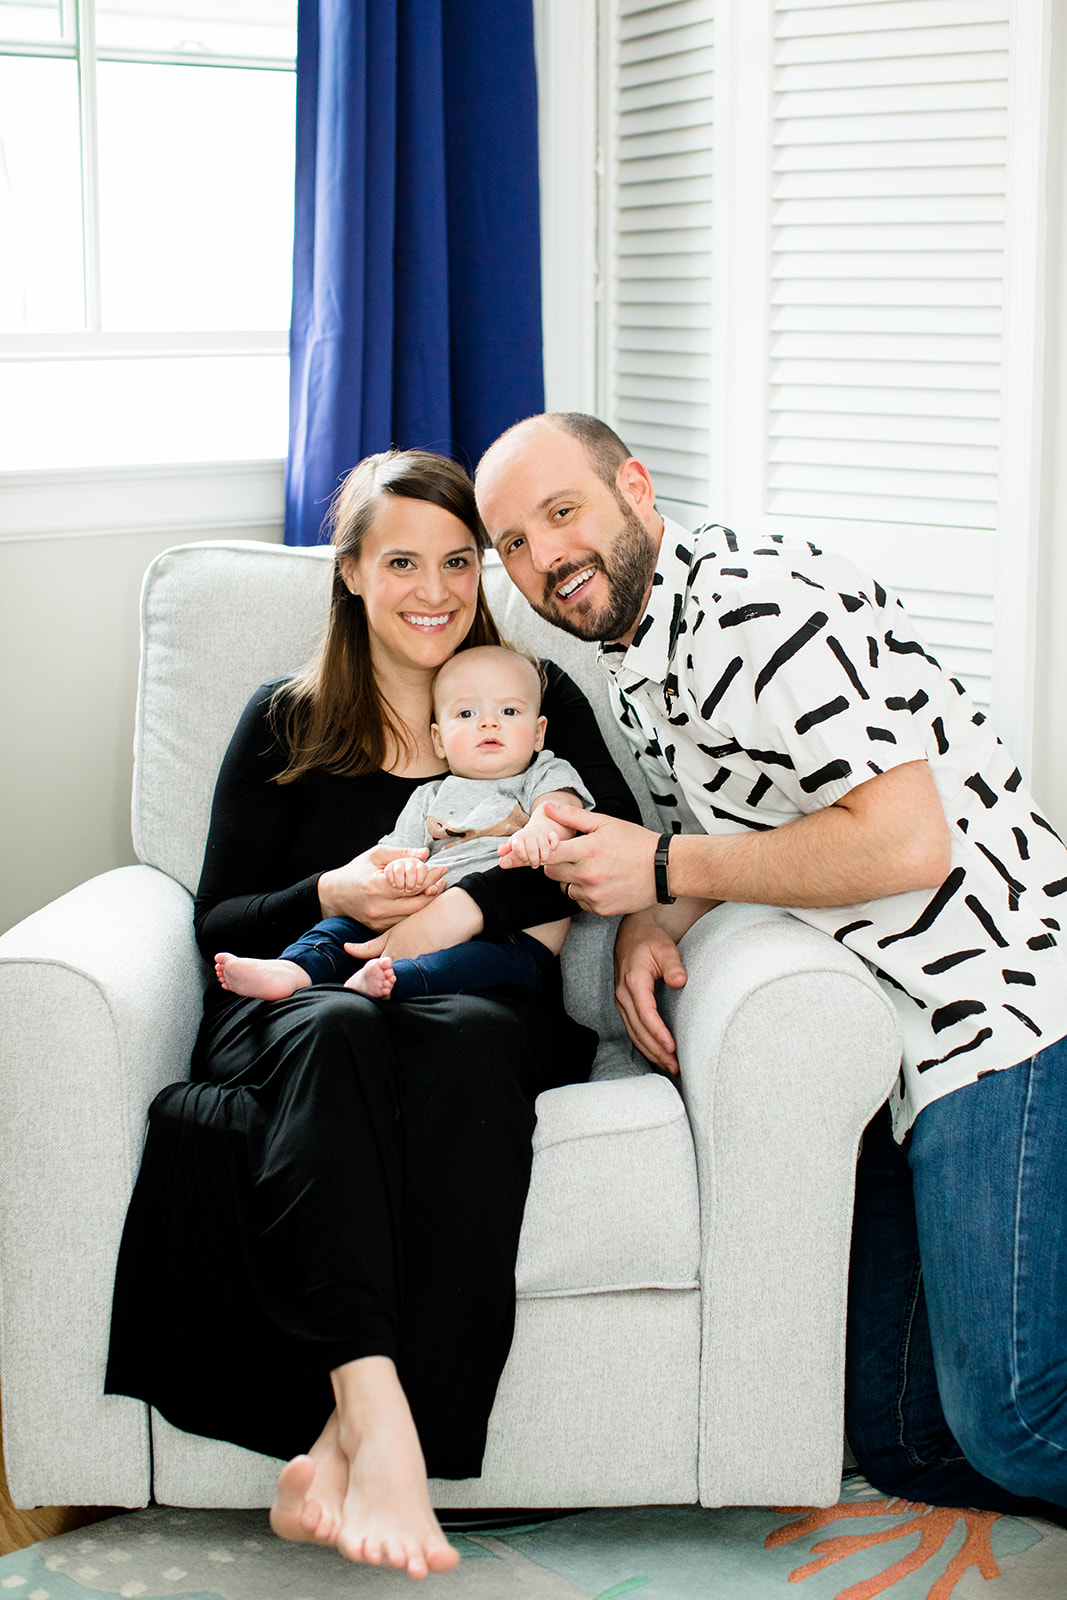 Richmond Va Lifestyle Family Photo Shoot with a Six Month Old - Image Property of www.j-dphoto.com